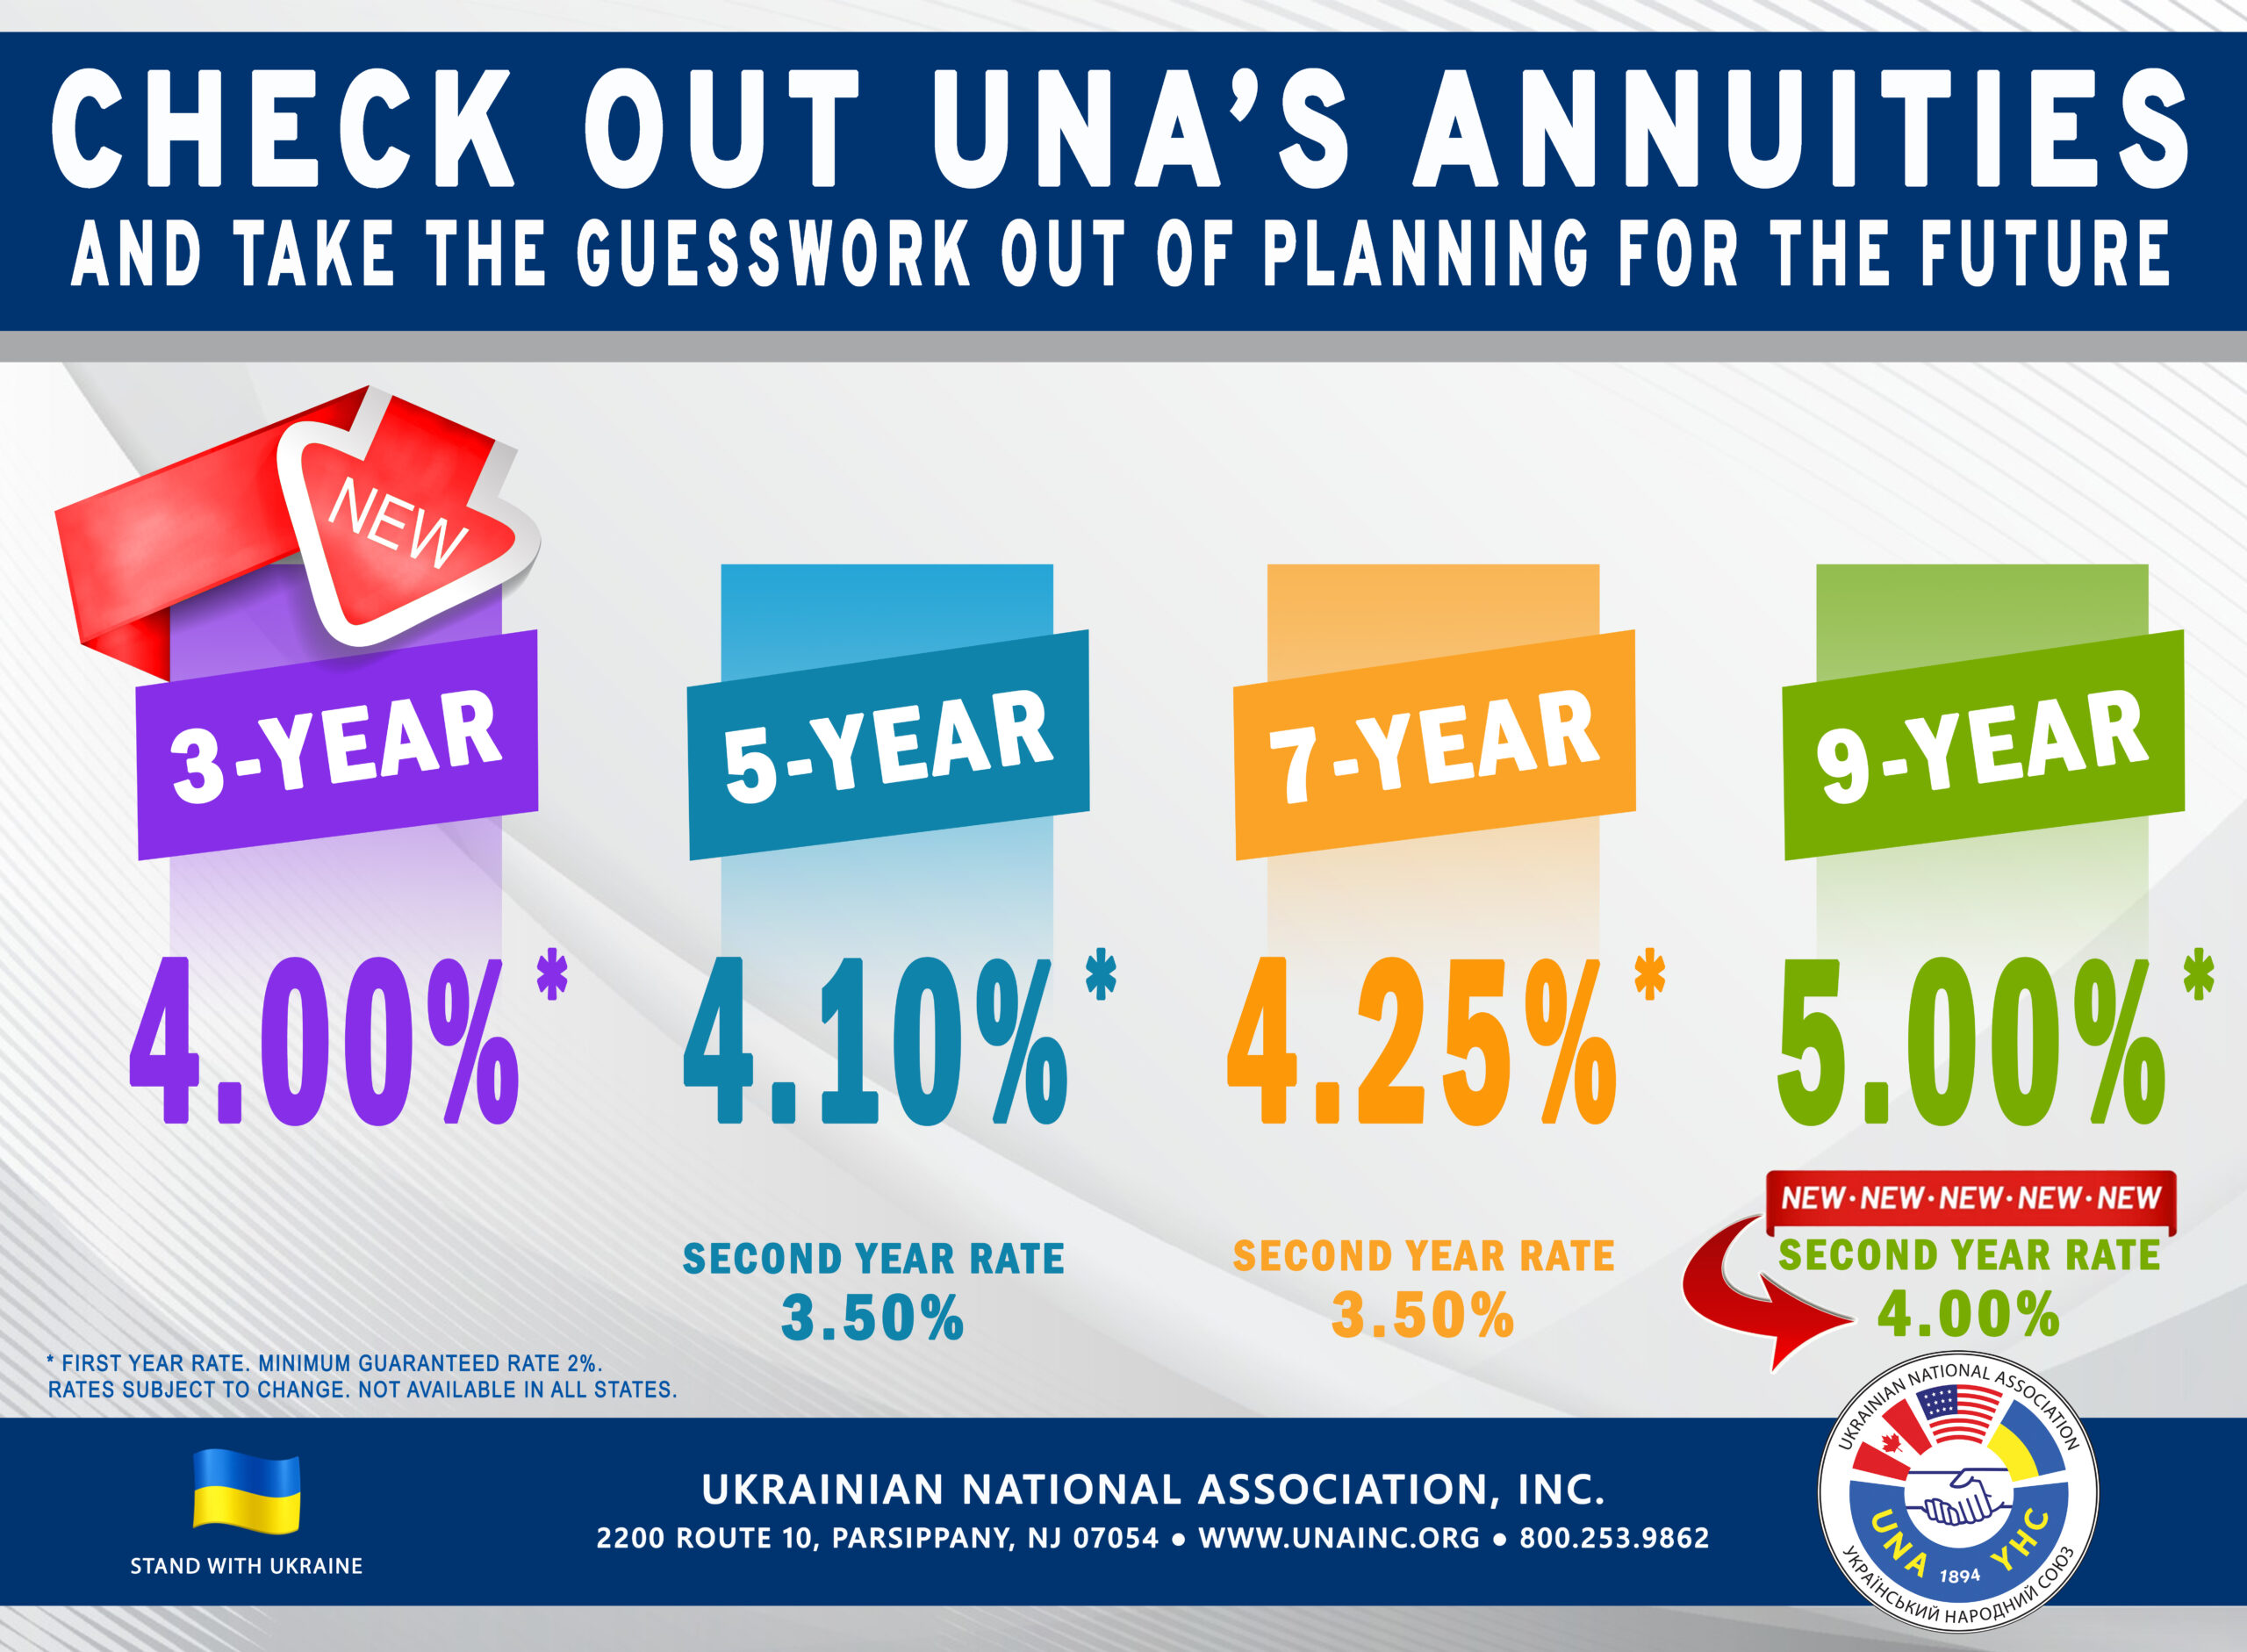 CHECK OUT UNA'S ANNUITIES and Take The Guesswork Out Of Planning For The Future